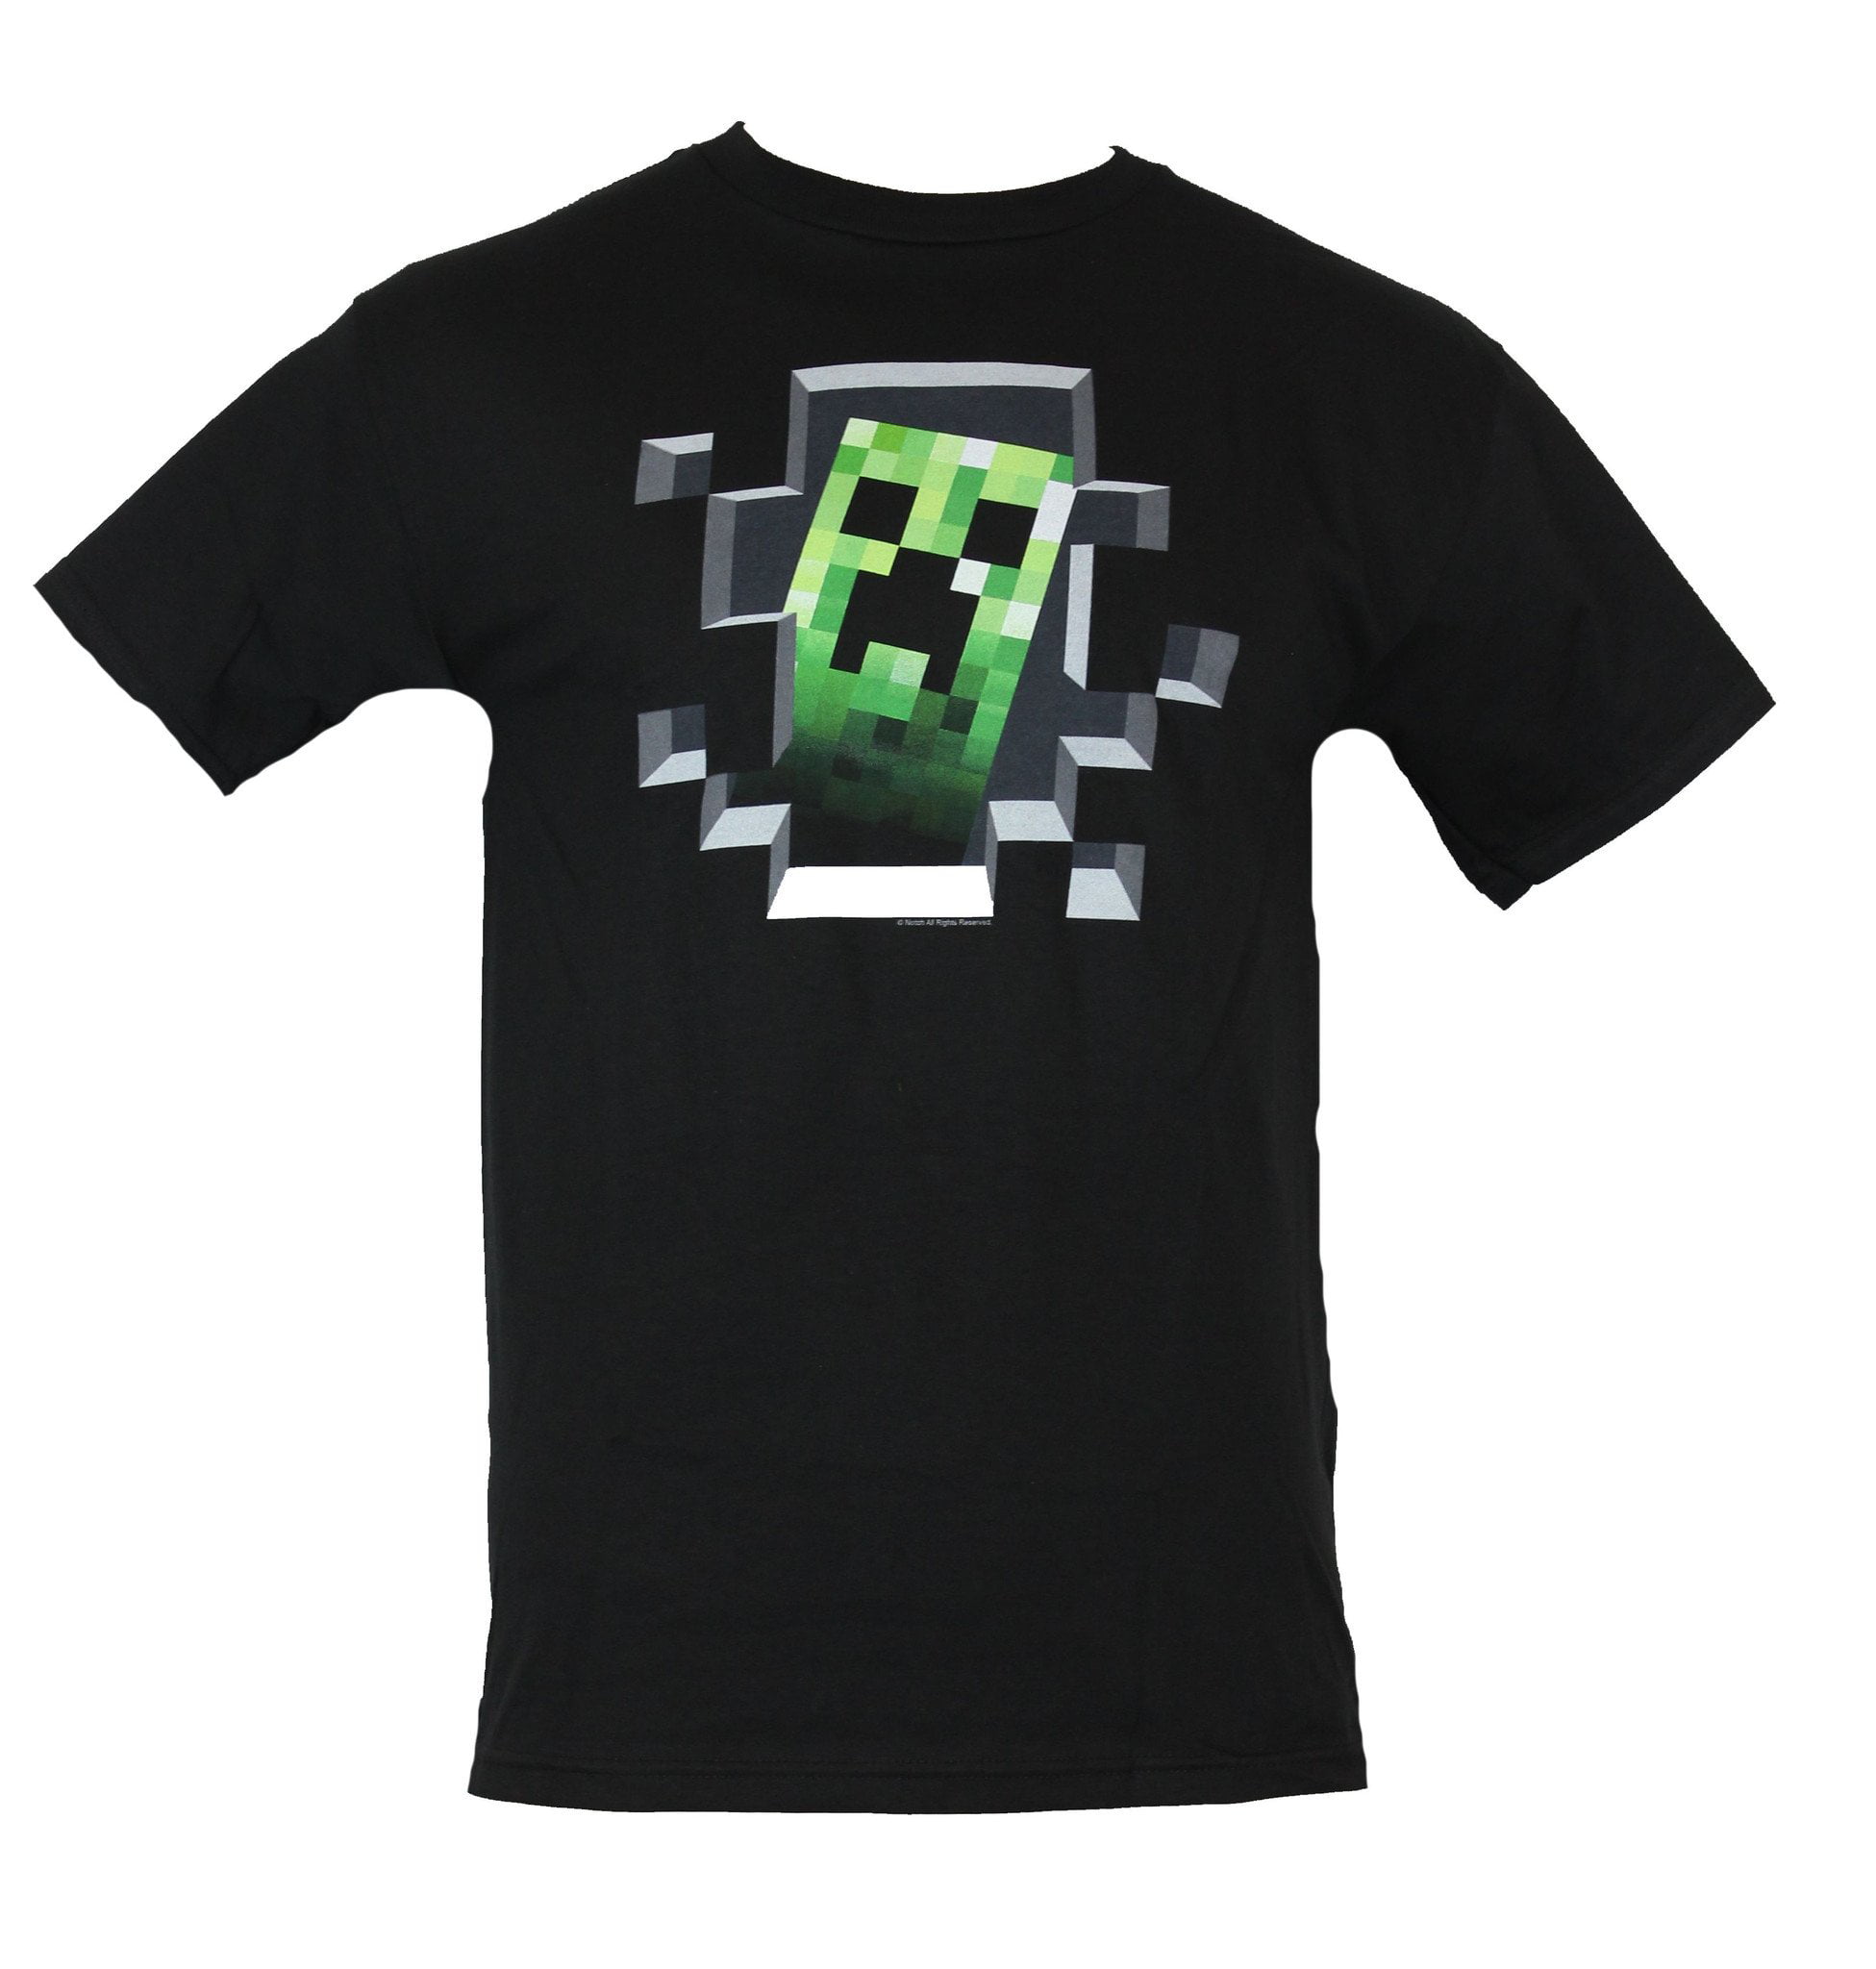 Minecraft Mens T-Shirt - Creeper Popping Through a Hole Image (X-Small)